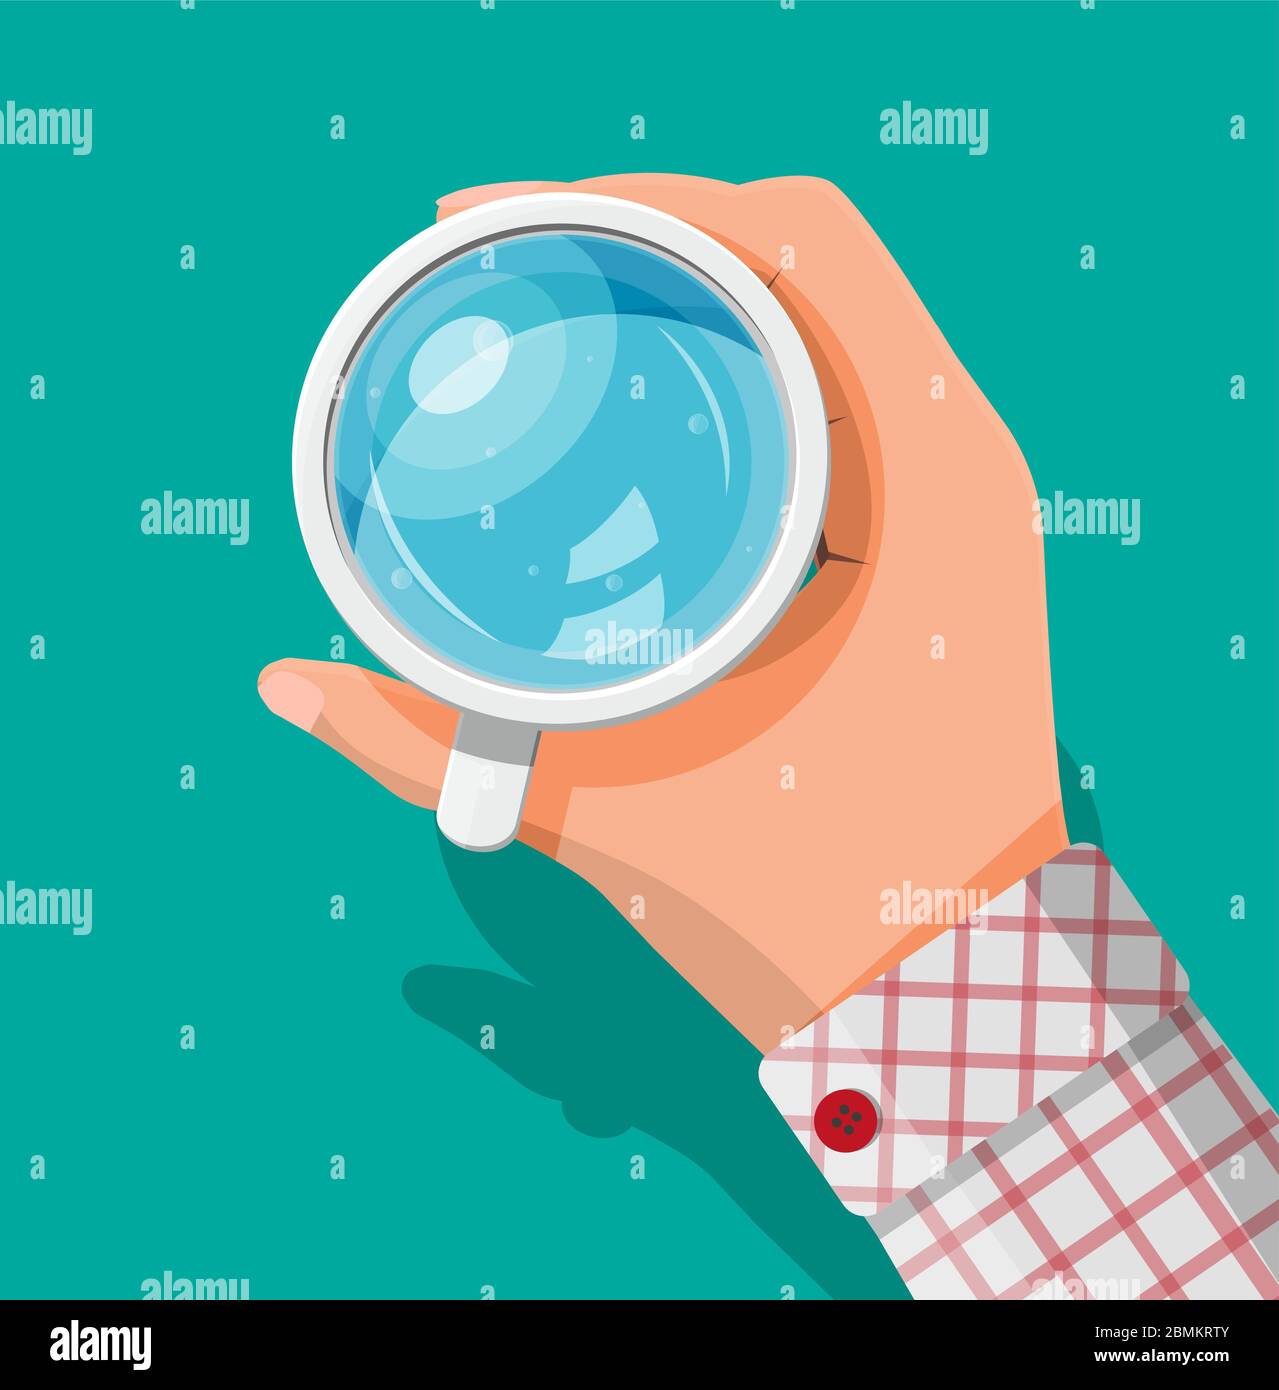 Water glass cup Stock Vector Image & Art - Alamy